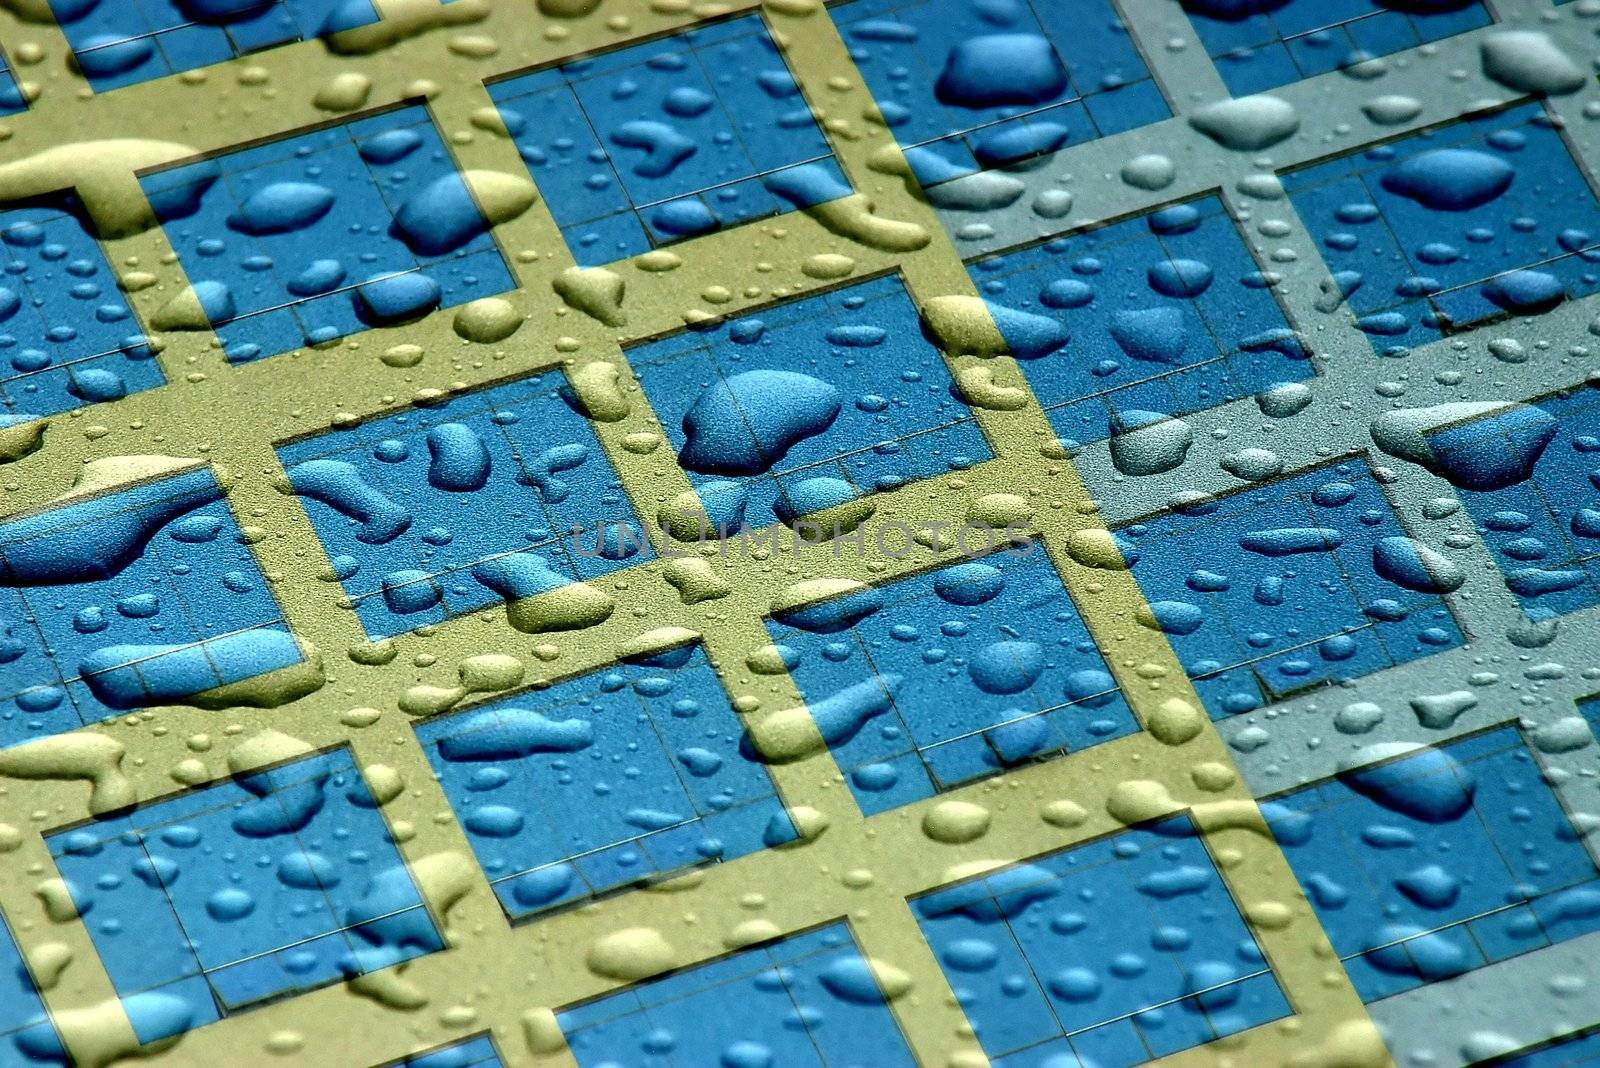 Rain Drops and Windows Abstract by clickbeetle